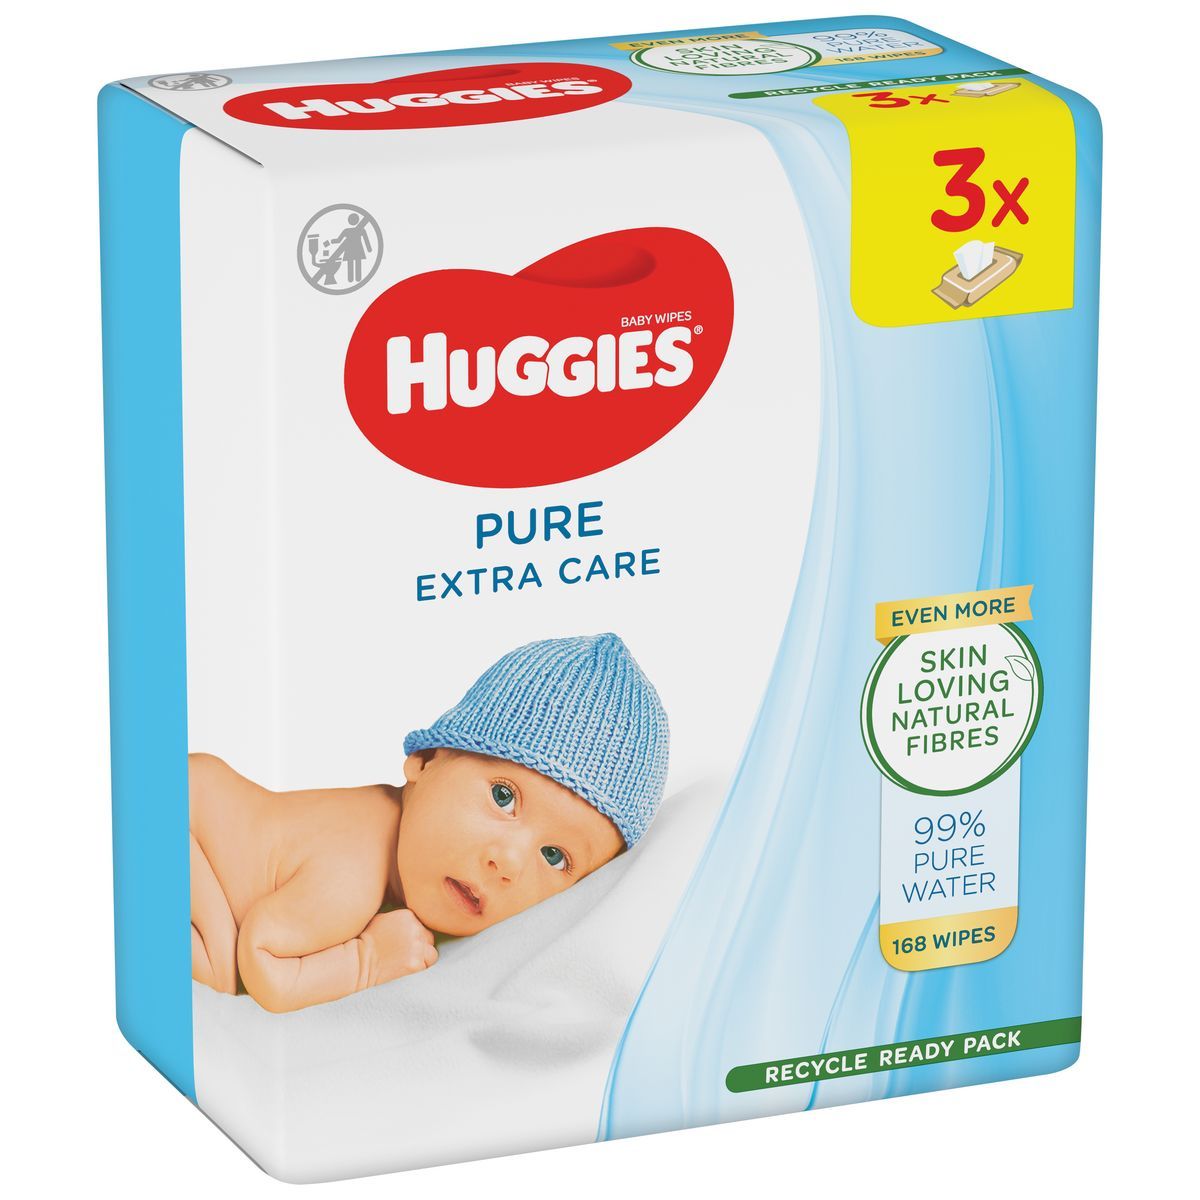  LINGETTES PURE EXTRA CARE HUGGIES